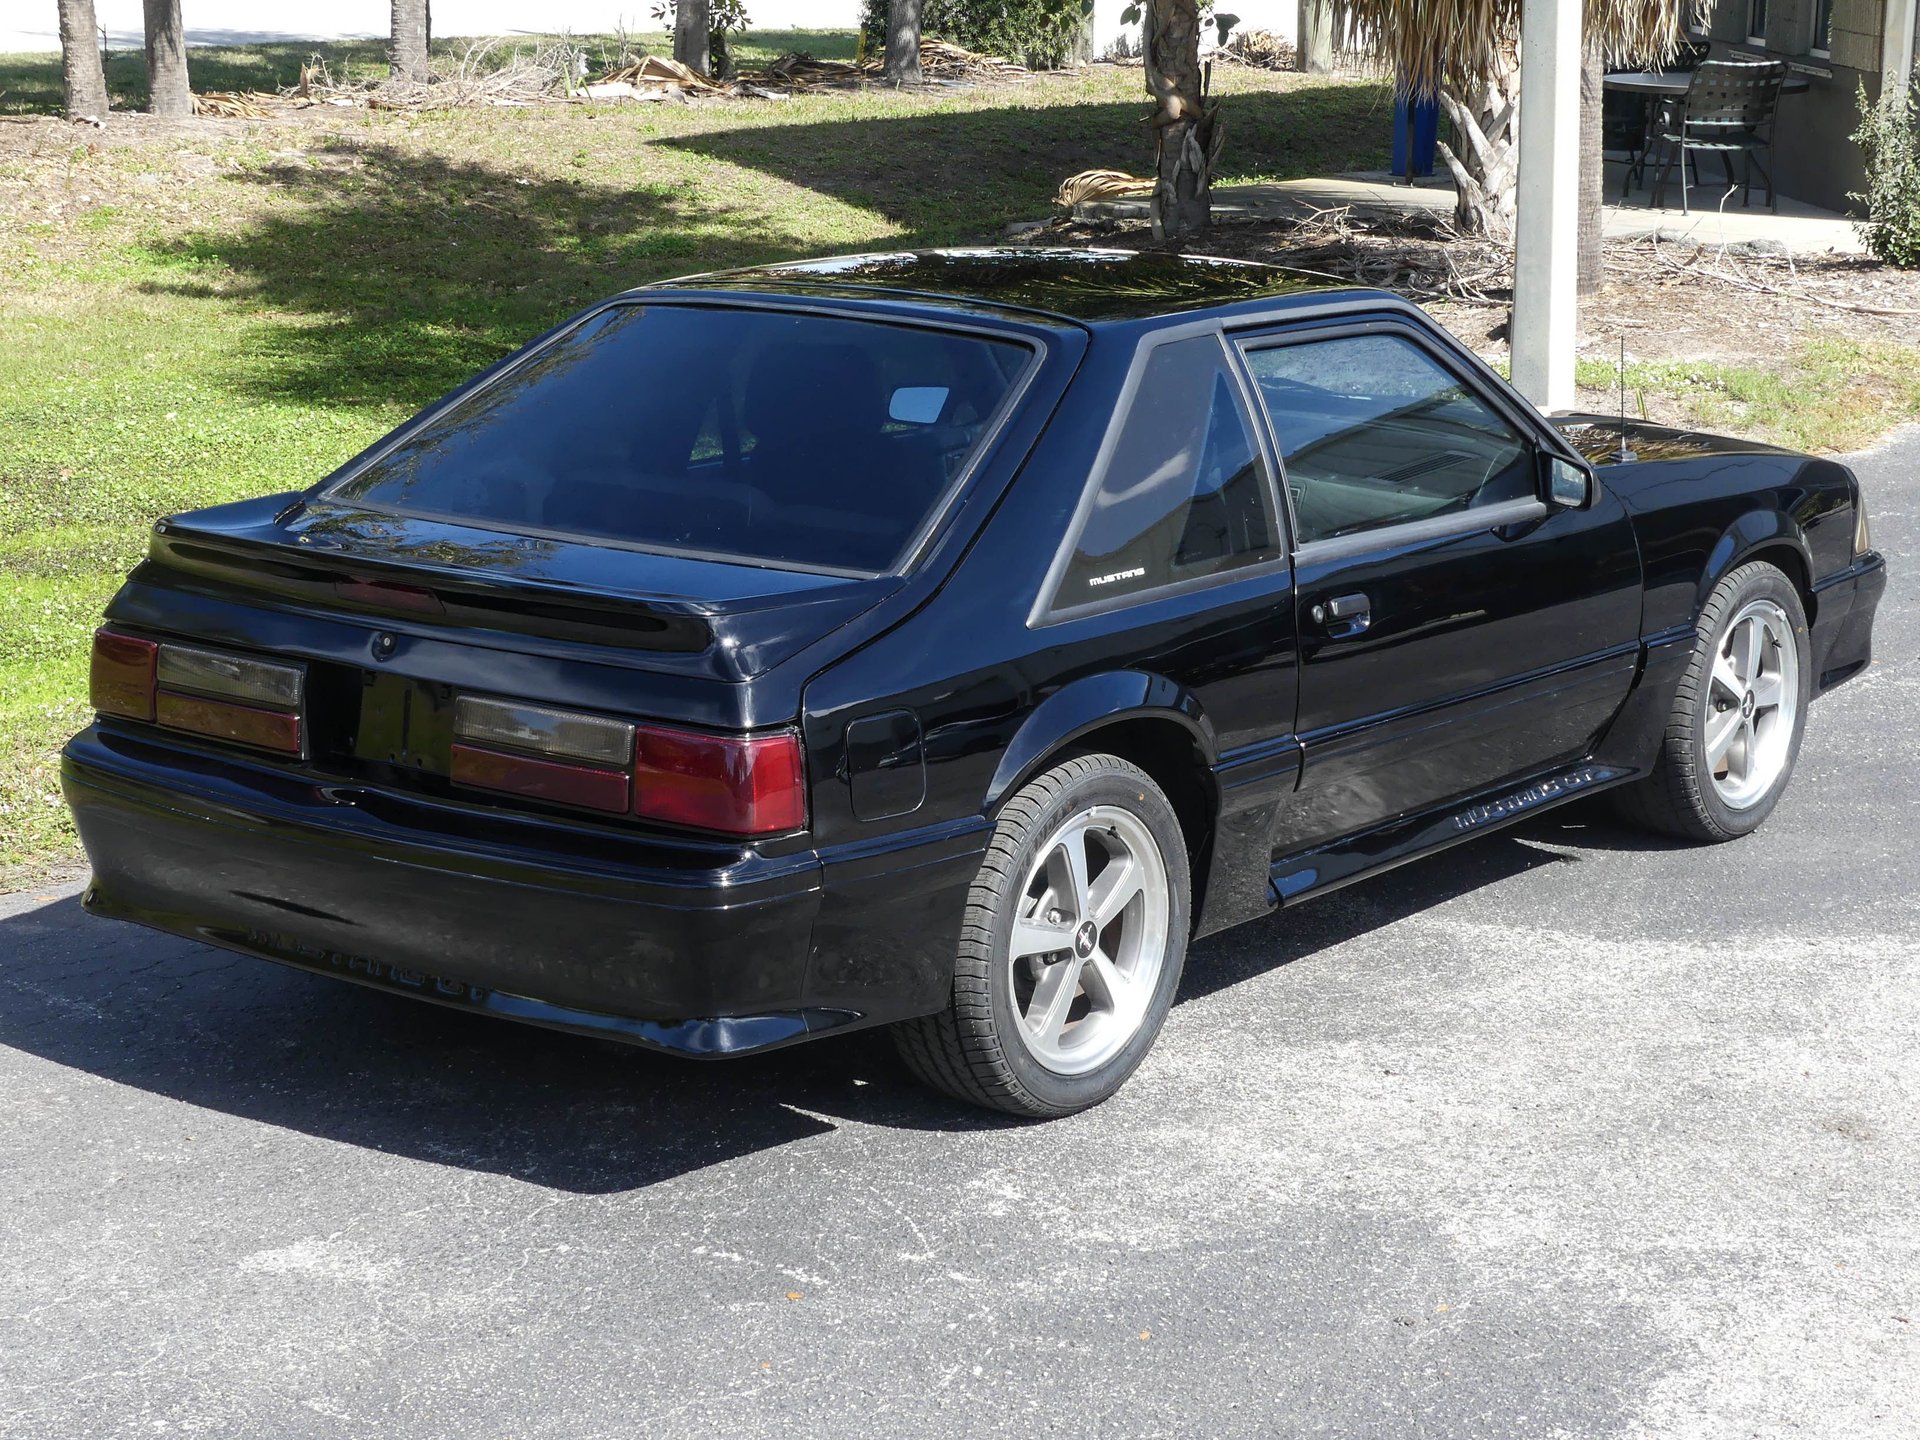 0674-TAMPA | 1988 Ford Mustang GT | Survivor Classic Cars Services